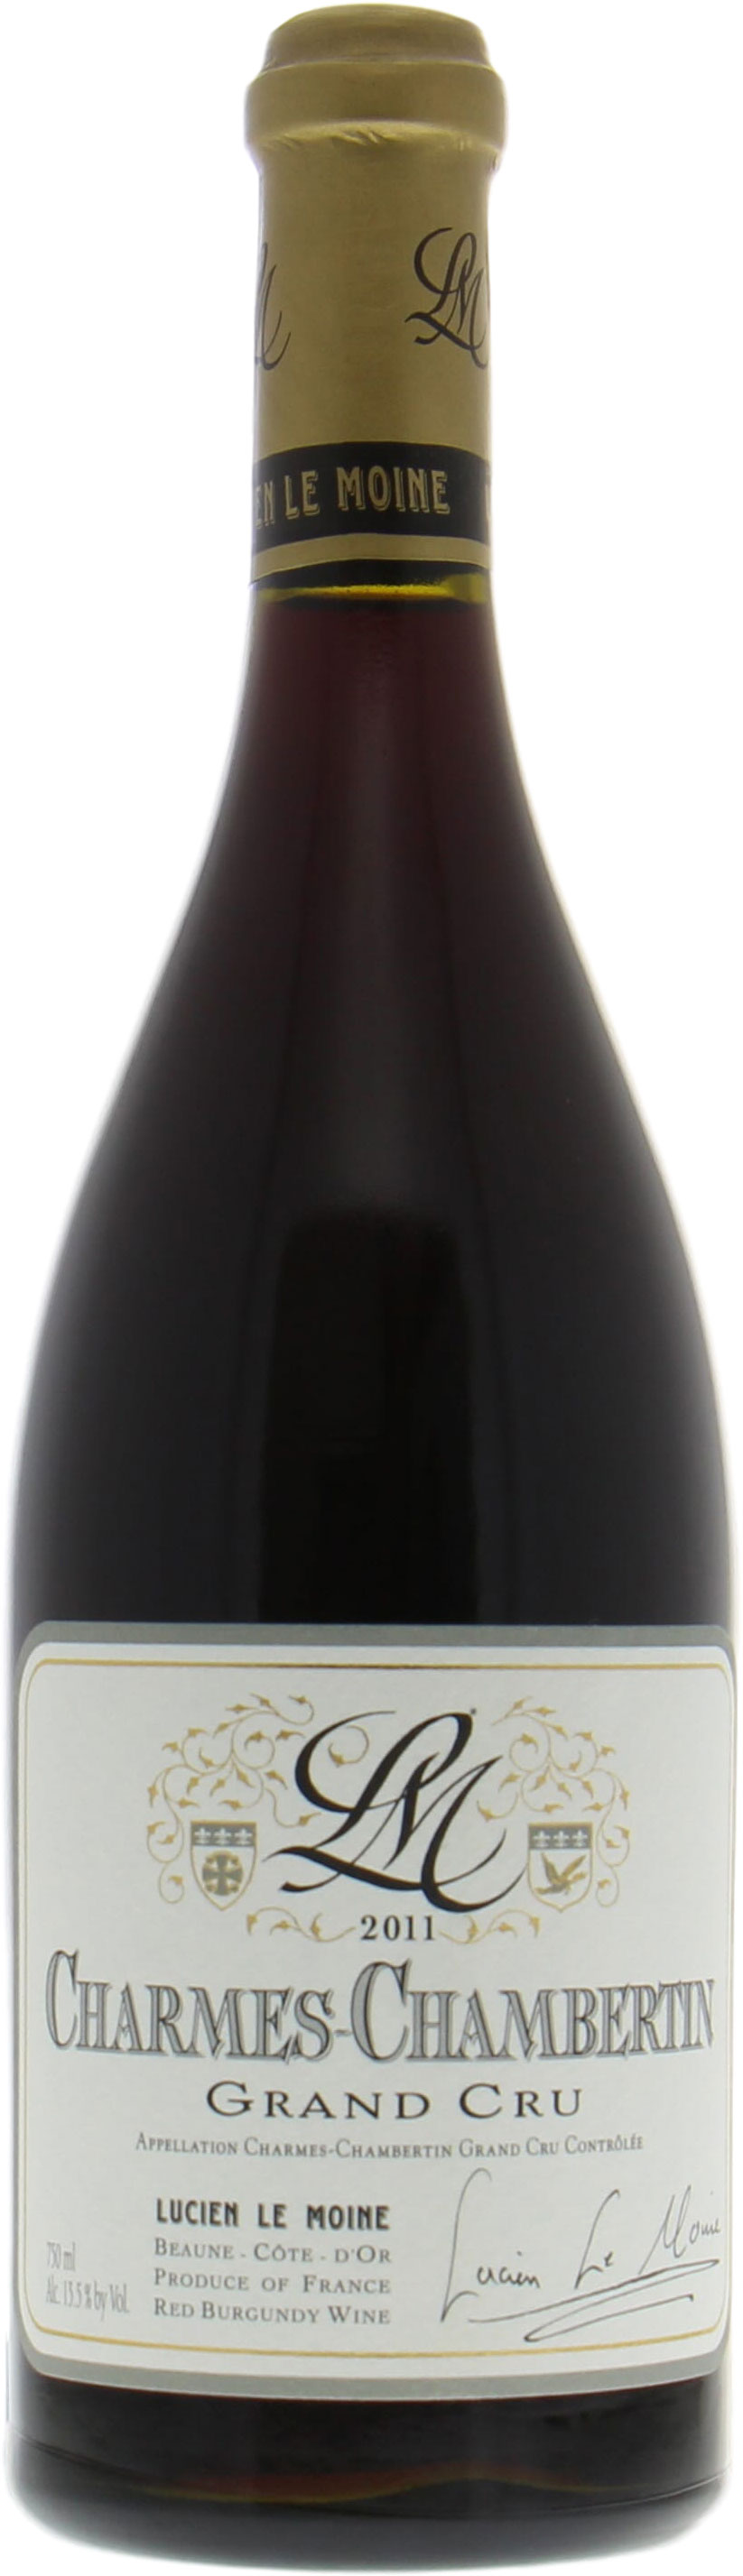 Lucien Le Moine - Charmes Chambertin 2011 Perfect